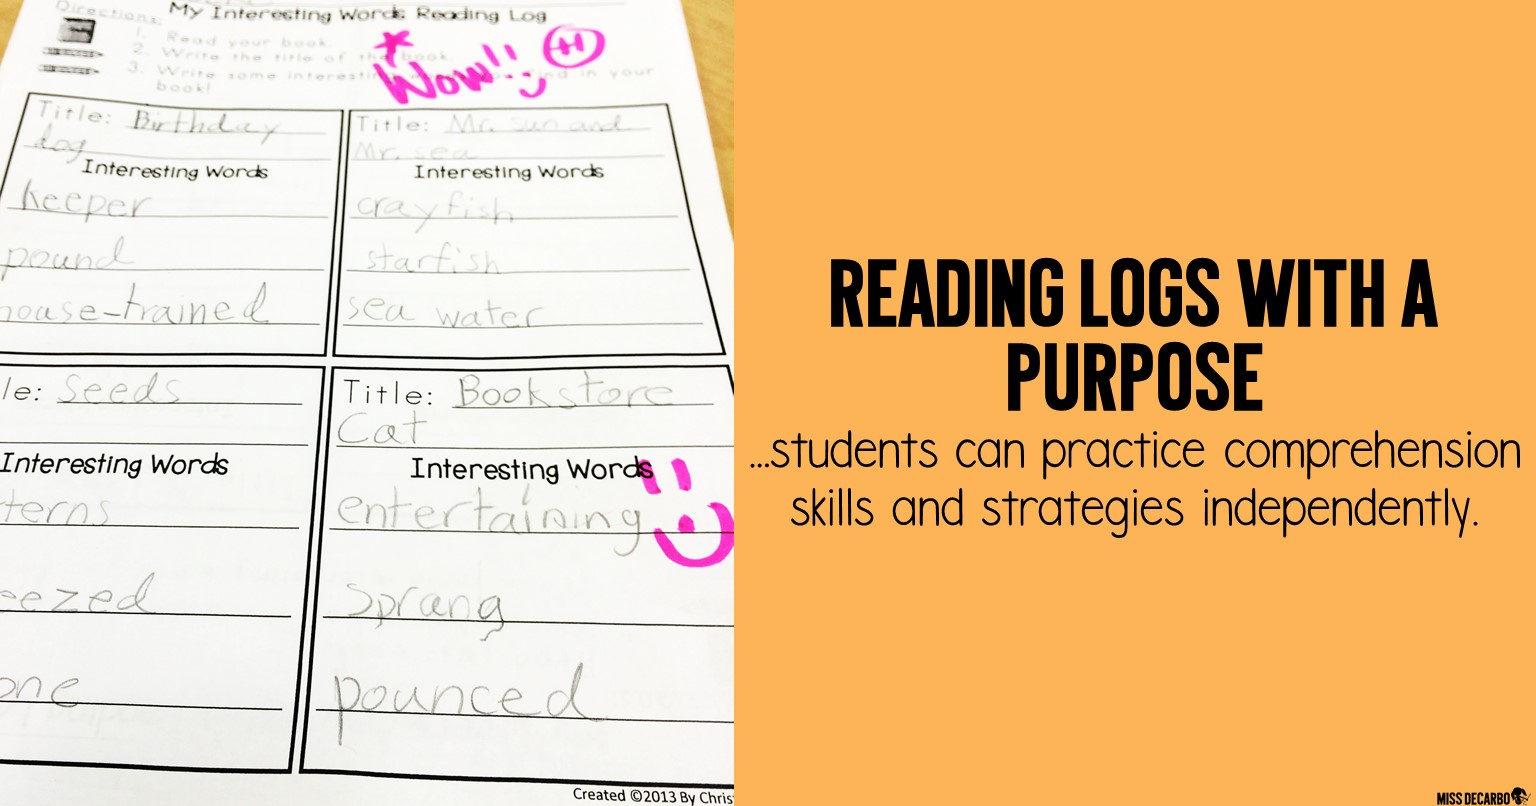 Reading logs with a twist! Check out why I stopped using traditional reading logs in my classroom, and learn how I renovated the reading log to make it intentional for comprehension and nightly reading.